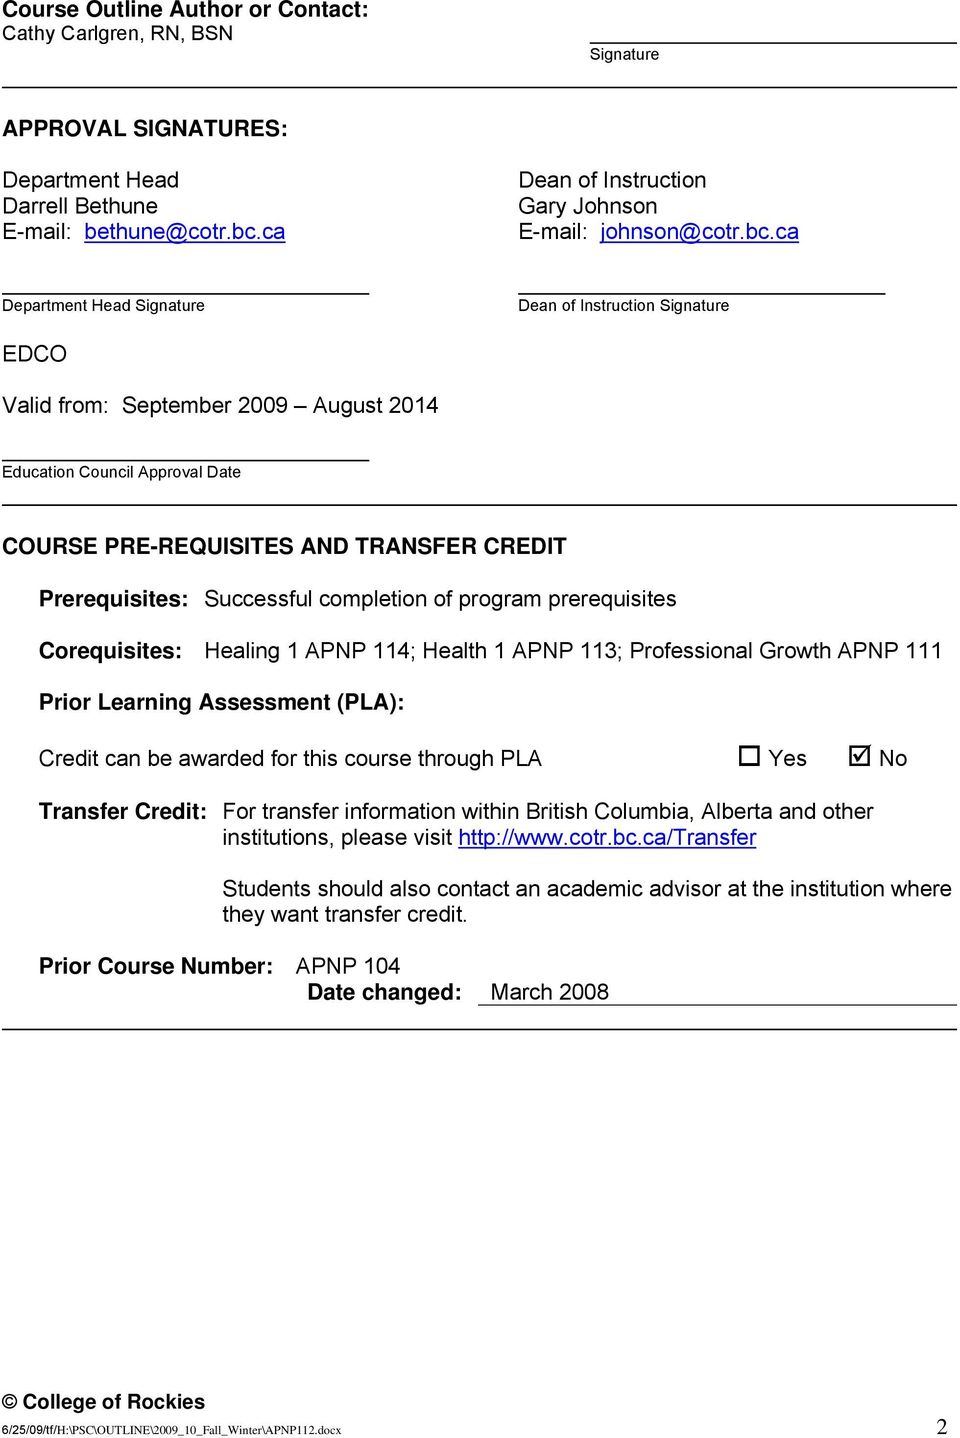 ca Department Head Signature Dean of Instruction Signature EDCO Valid from: September 2009 August 2014 Education Council Approval Date COURSE PRE-REQUISITES AND TRANSFER CREDIT Prerequisites: